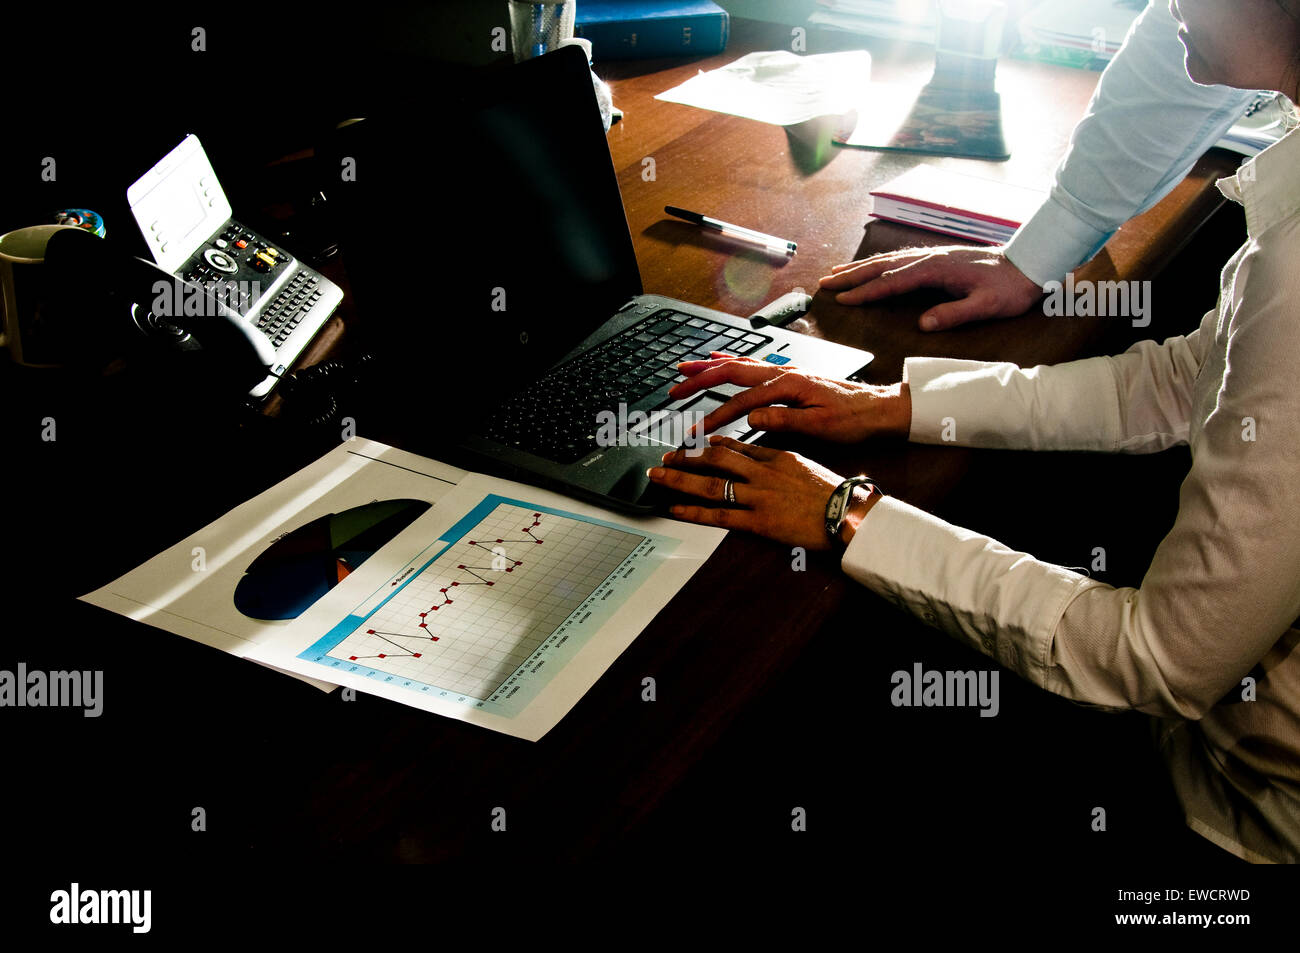 man and woman executives working on laptop. Stock Photo